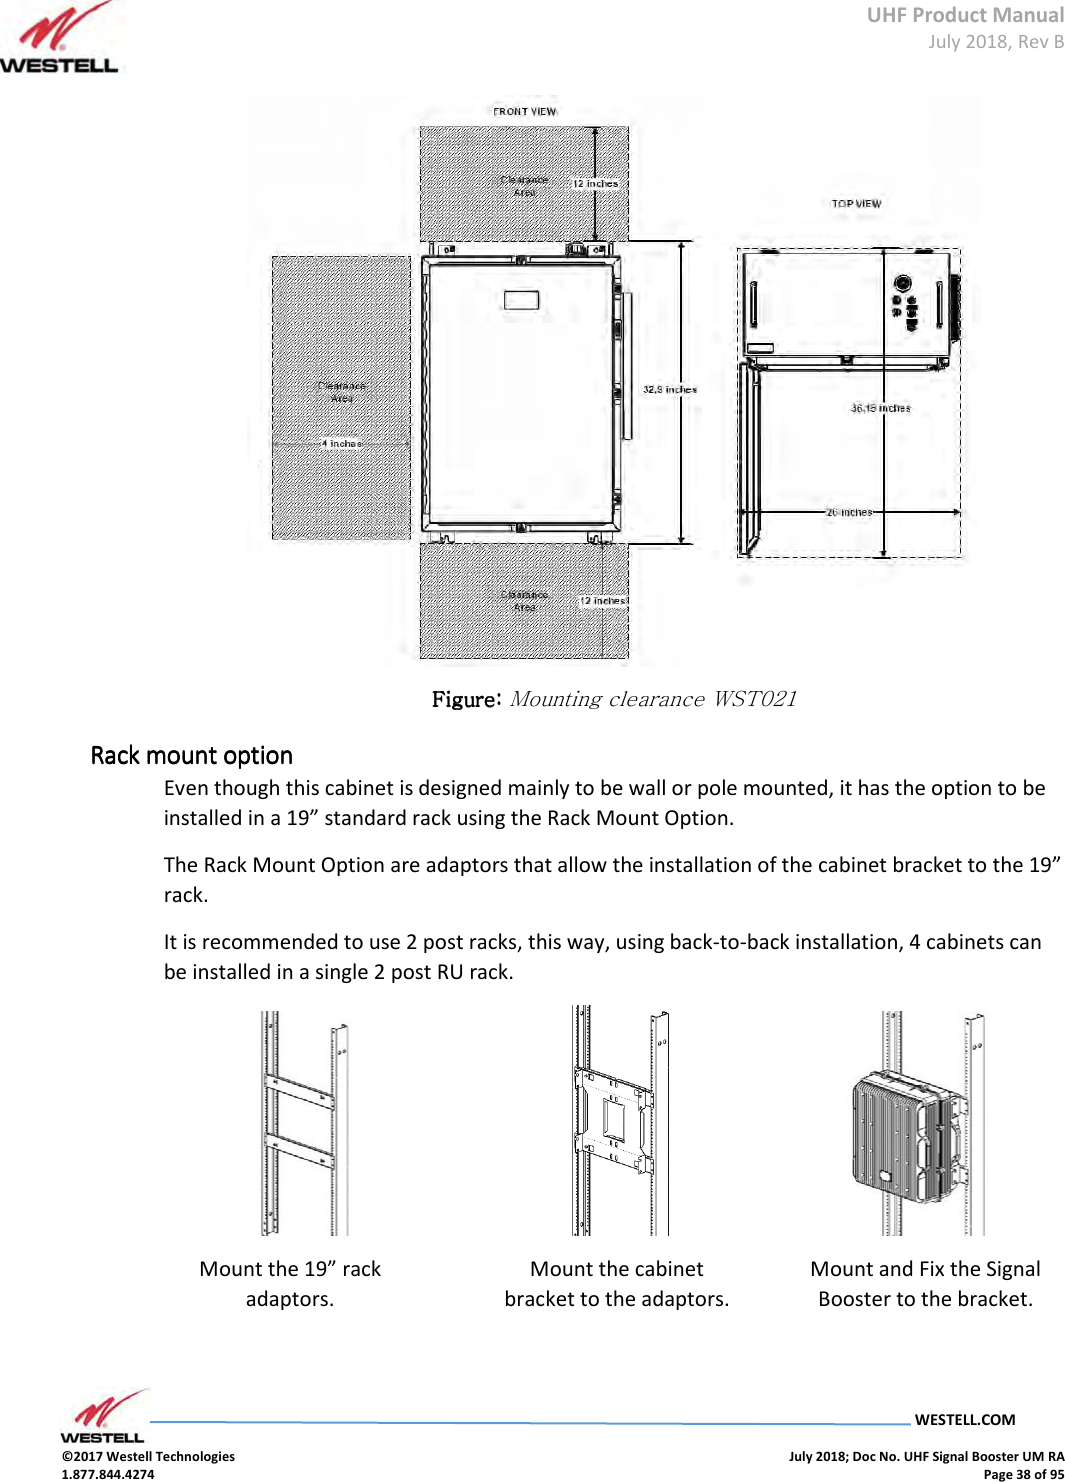 UHF Product Manual July 2018, Rev B   WESTELL.COM  ©2017 Westell Technologies    July 2018; Doc No. UHF Signal Booster UM RA 1.877.844.4274    Page 38 of 95   Figure: Figure: Figure: Figure: Mounting clearance WST021 Rack mount optionRack mount optionRack mount optionRack mount option    Even though this cabinet is designed mainly to be wall or pole mounted, it has the option to be installed in a 19” standard rack using the Rack Mount Option. The Rack Mount Option are adaptors that allow the installation of the cabinet bracket to the 19” rack. It is recommended to use 2 post racks, this way, using back-to-back installation, 4 cabinets can be installed in a single 2 post RU rack.                                          Mount the 19” rack adaptors. Mount the cabinet bracket to the adaptors. Mount and Fix the Signal Booster to the bracket. 